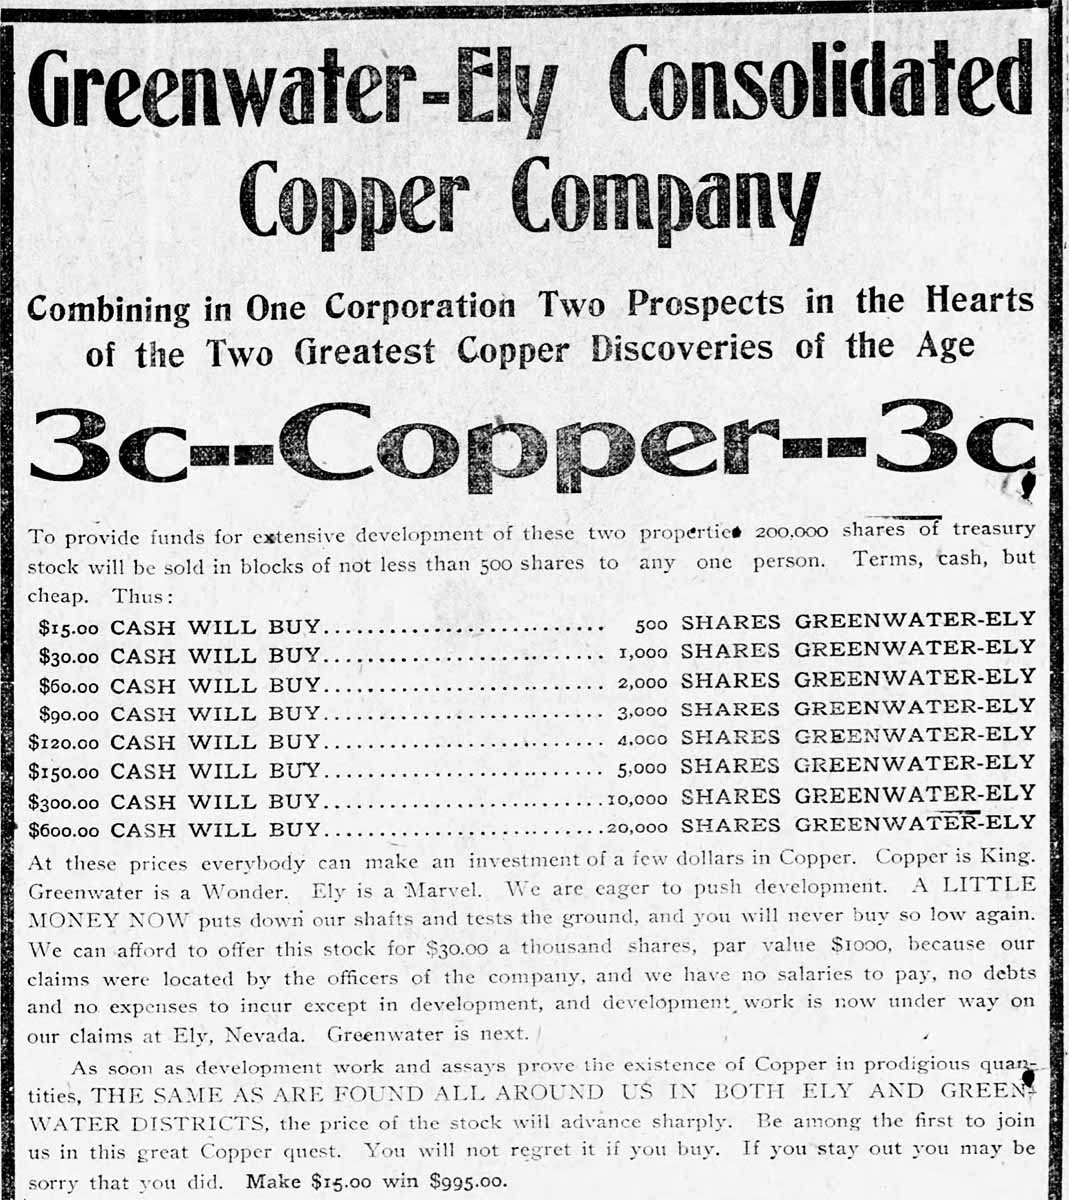 Greenwater advertisement from the February 2, 1907 edition of the San Francisco Bulletin